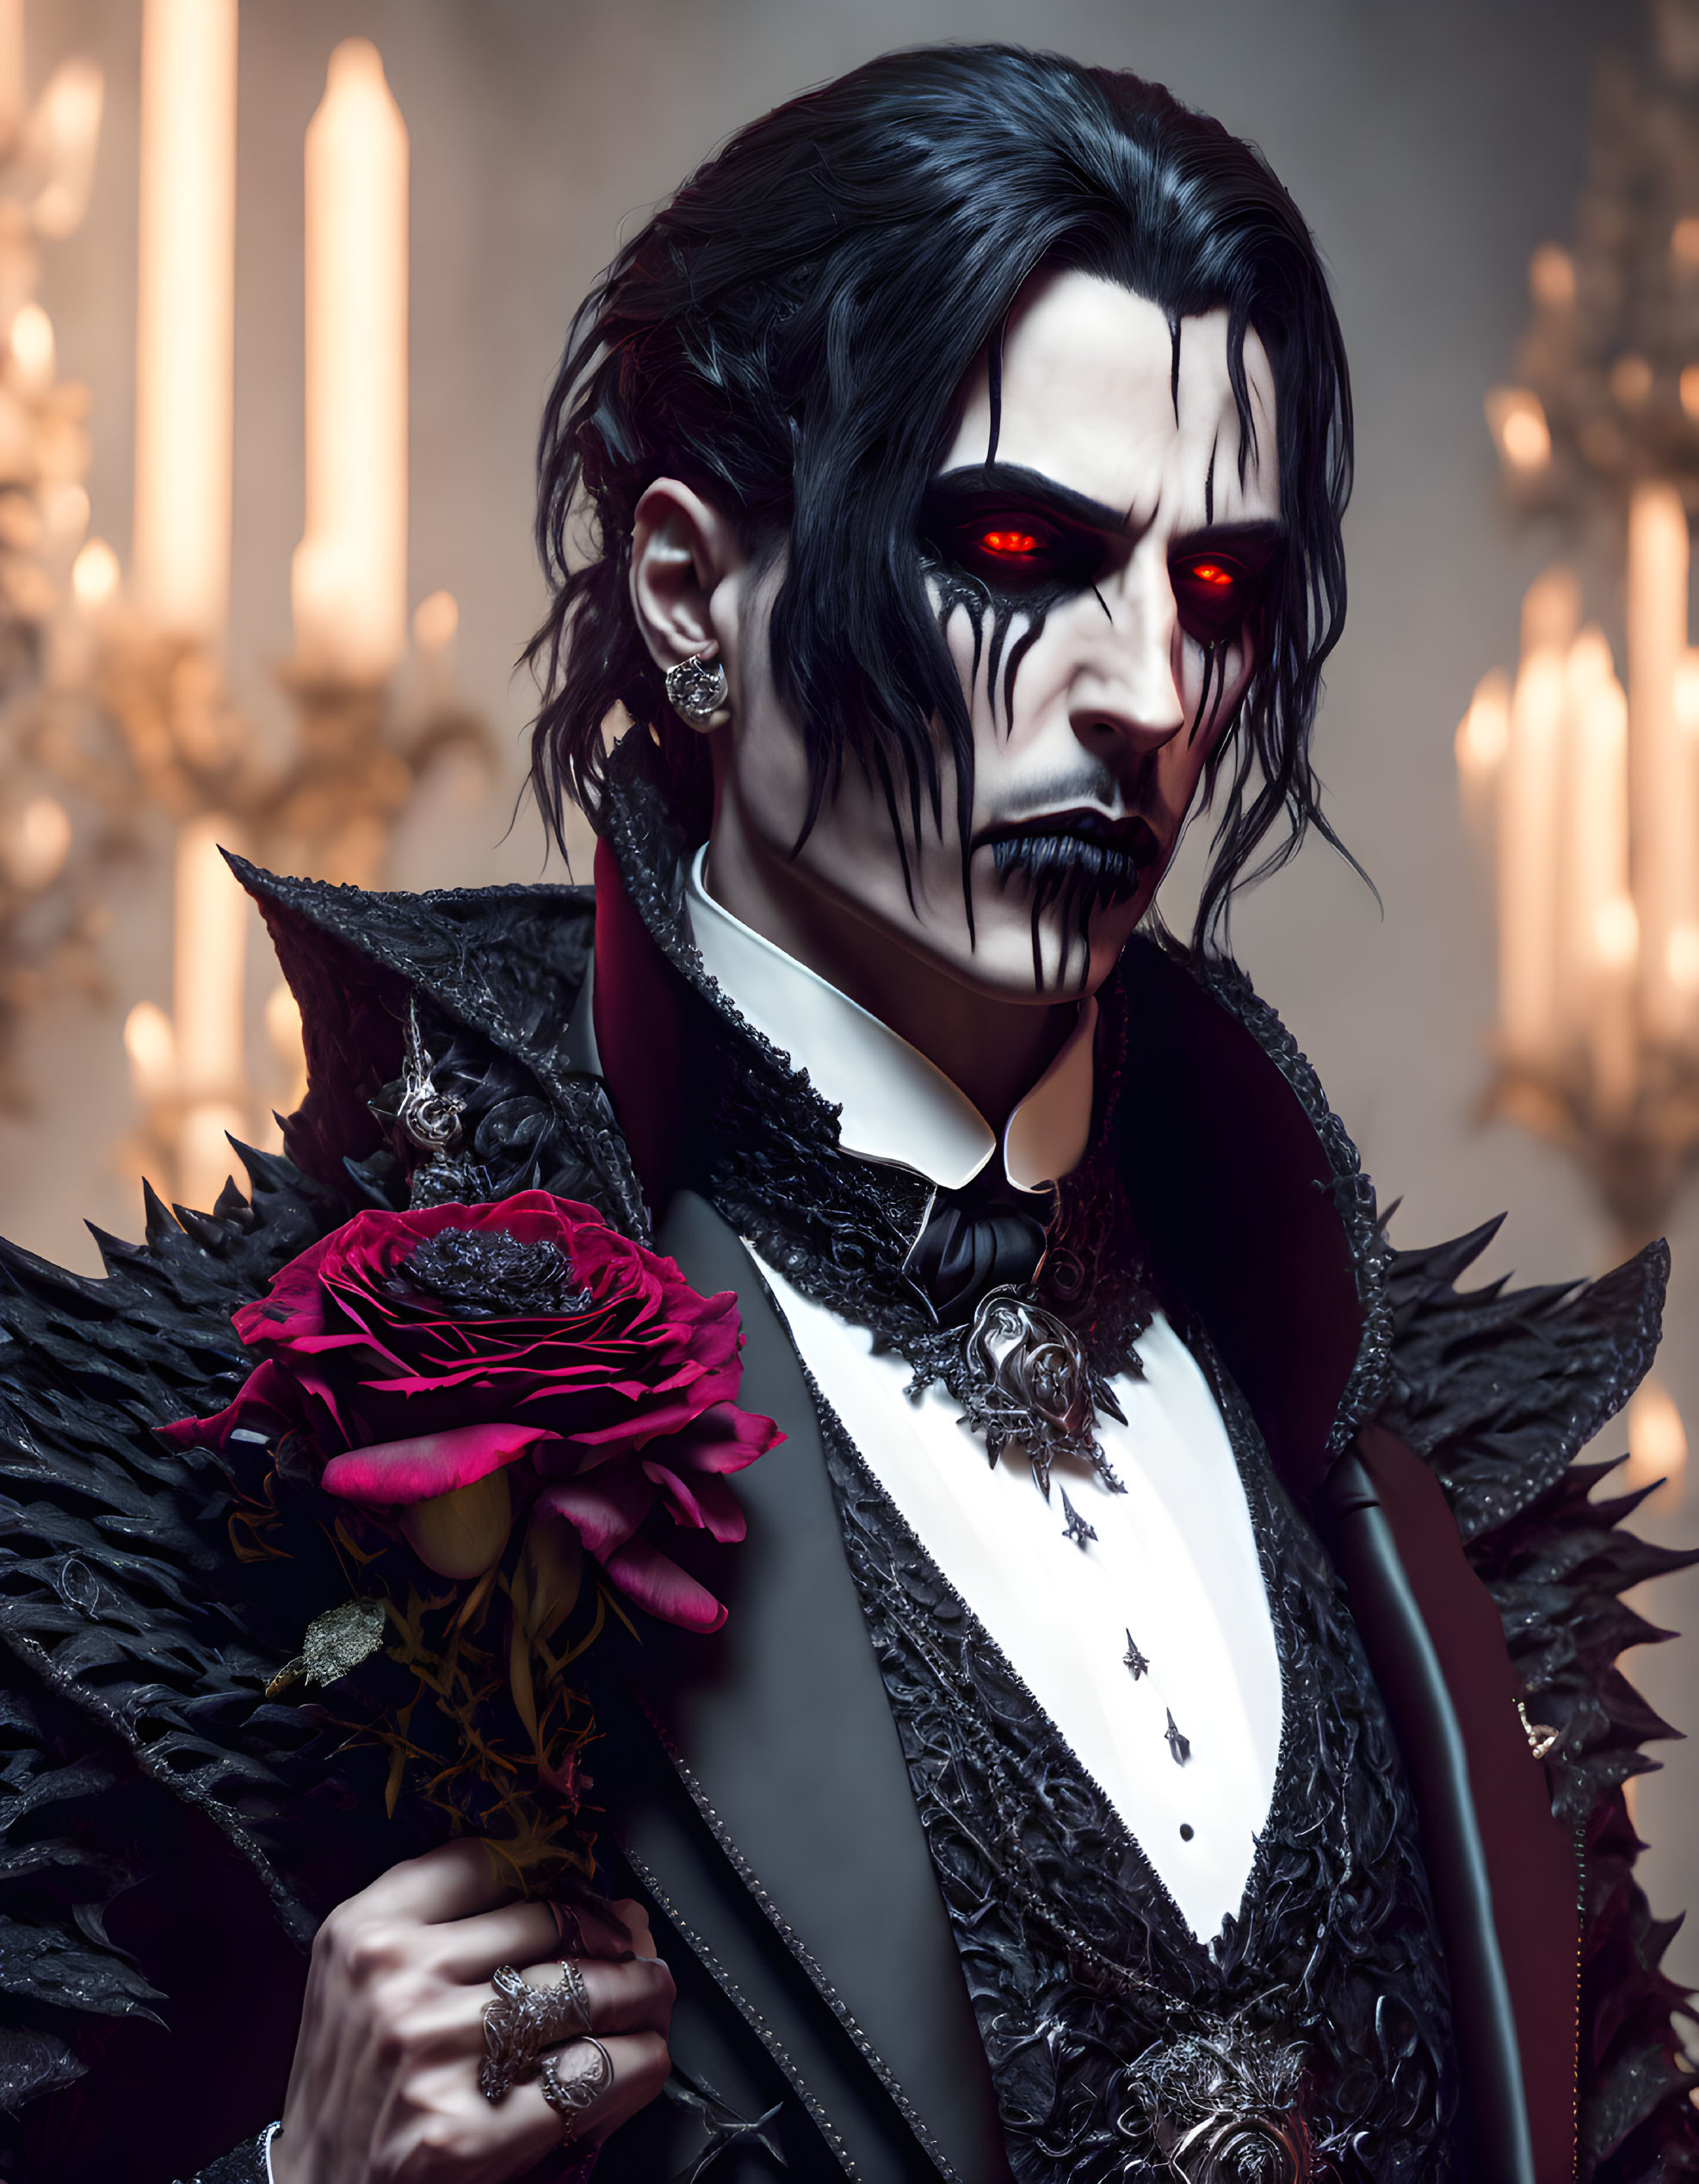 Gothic vampire illustration with red eyes and dark rose in ornate Victorian attire